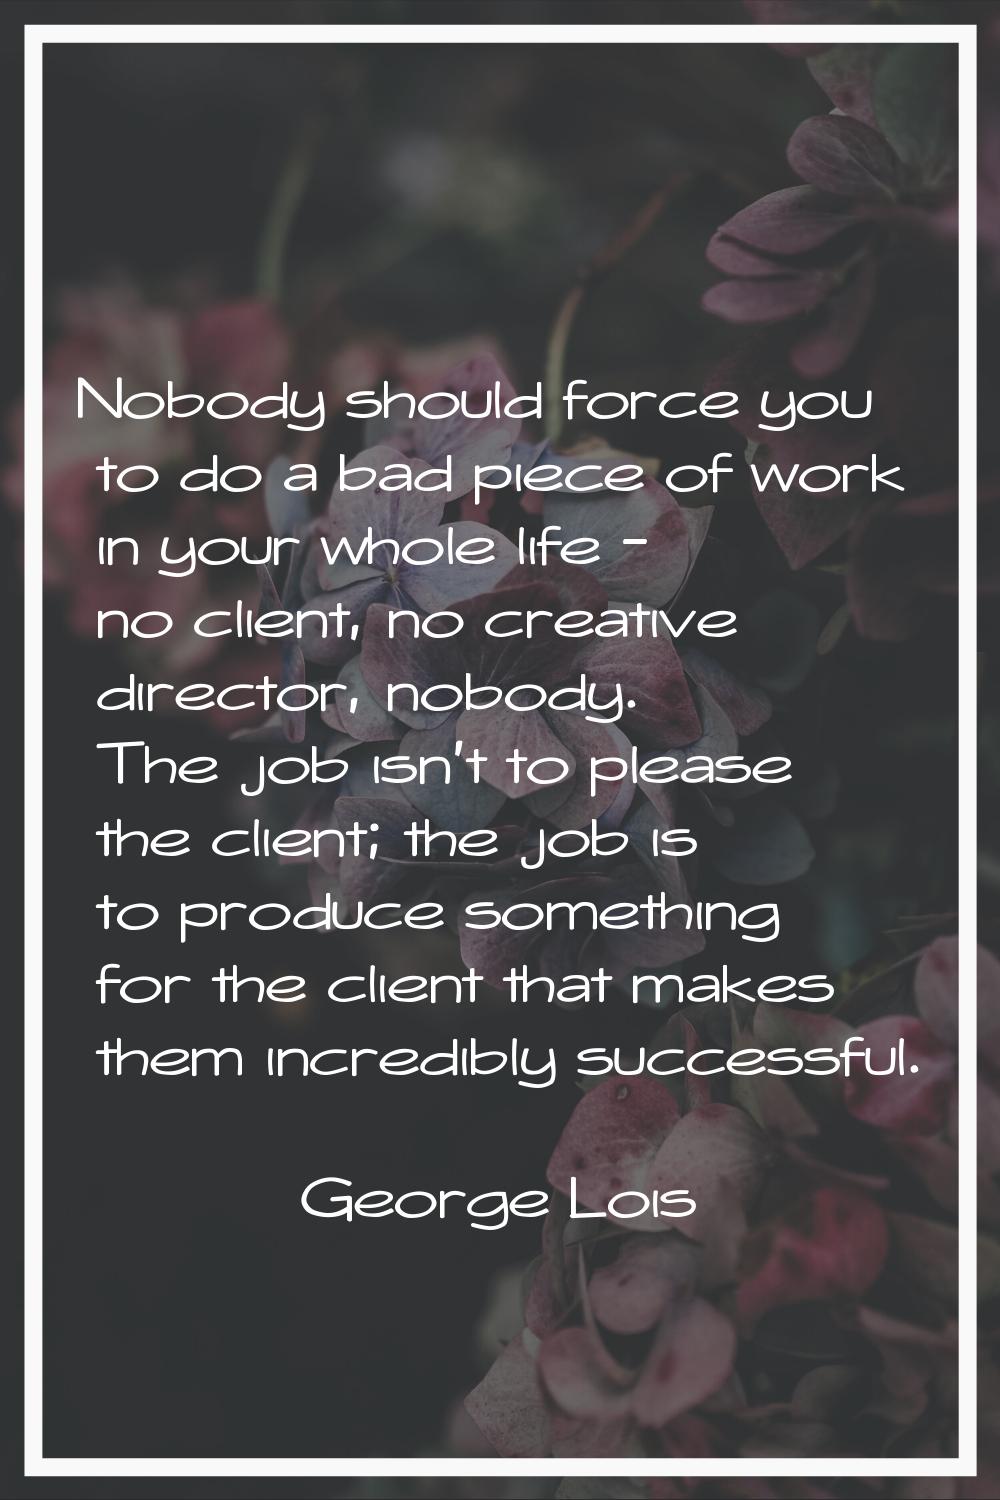 Nobody should force you to do a bad piece of work in your whole life - no client, no creative direc